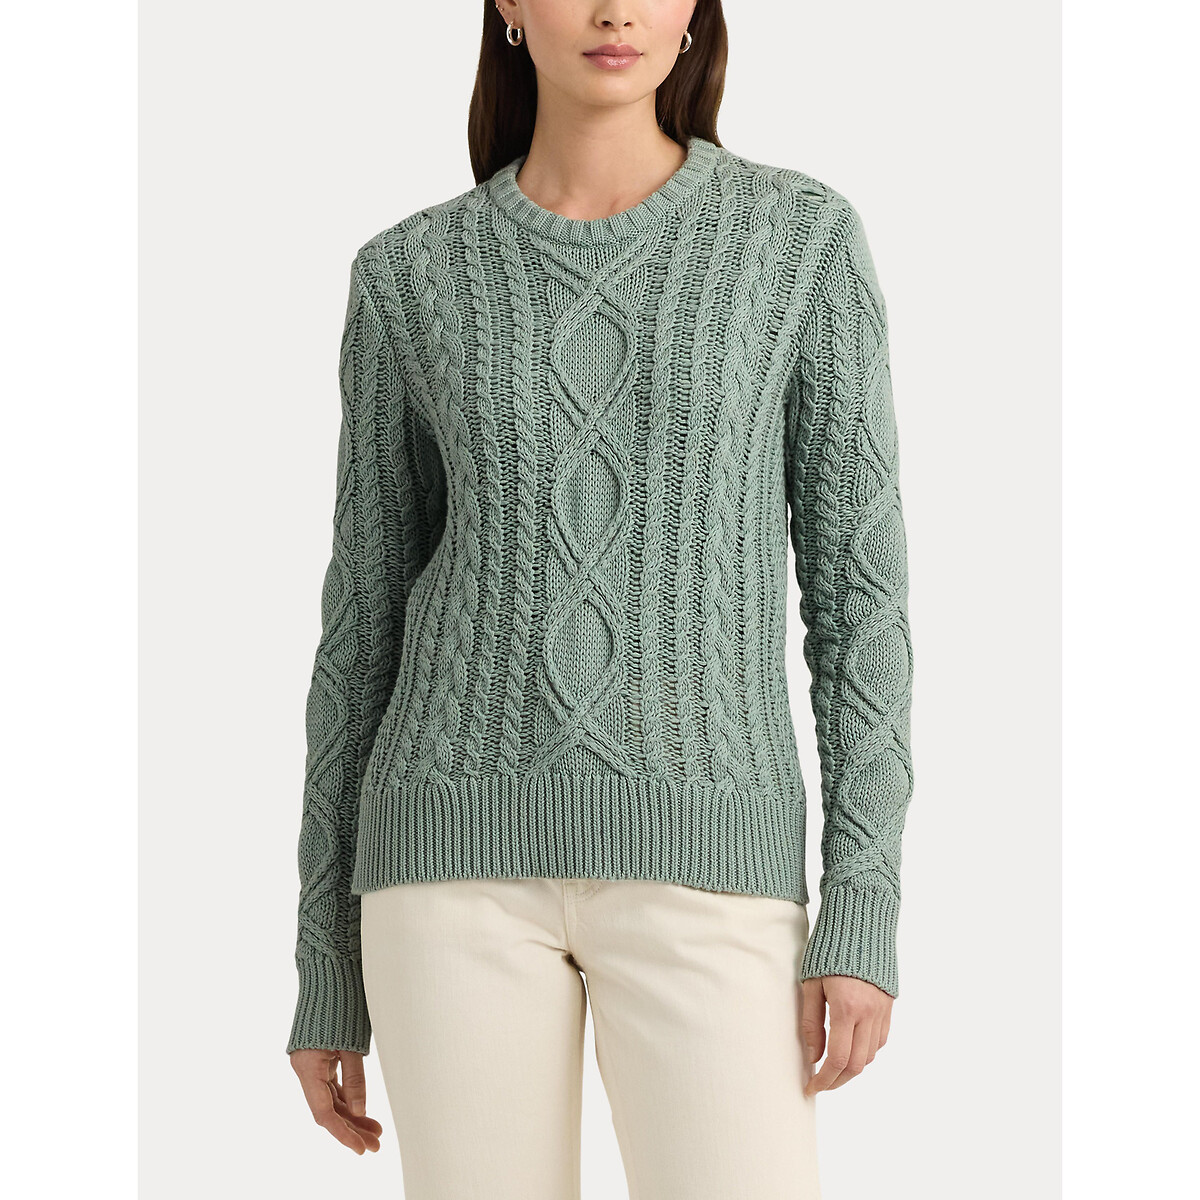 Hilvaite Cotton Jumper in Cable Knit with Crew Neck